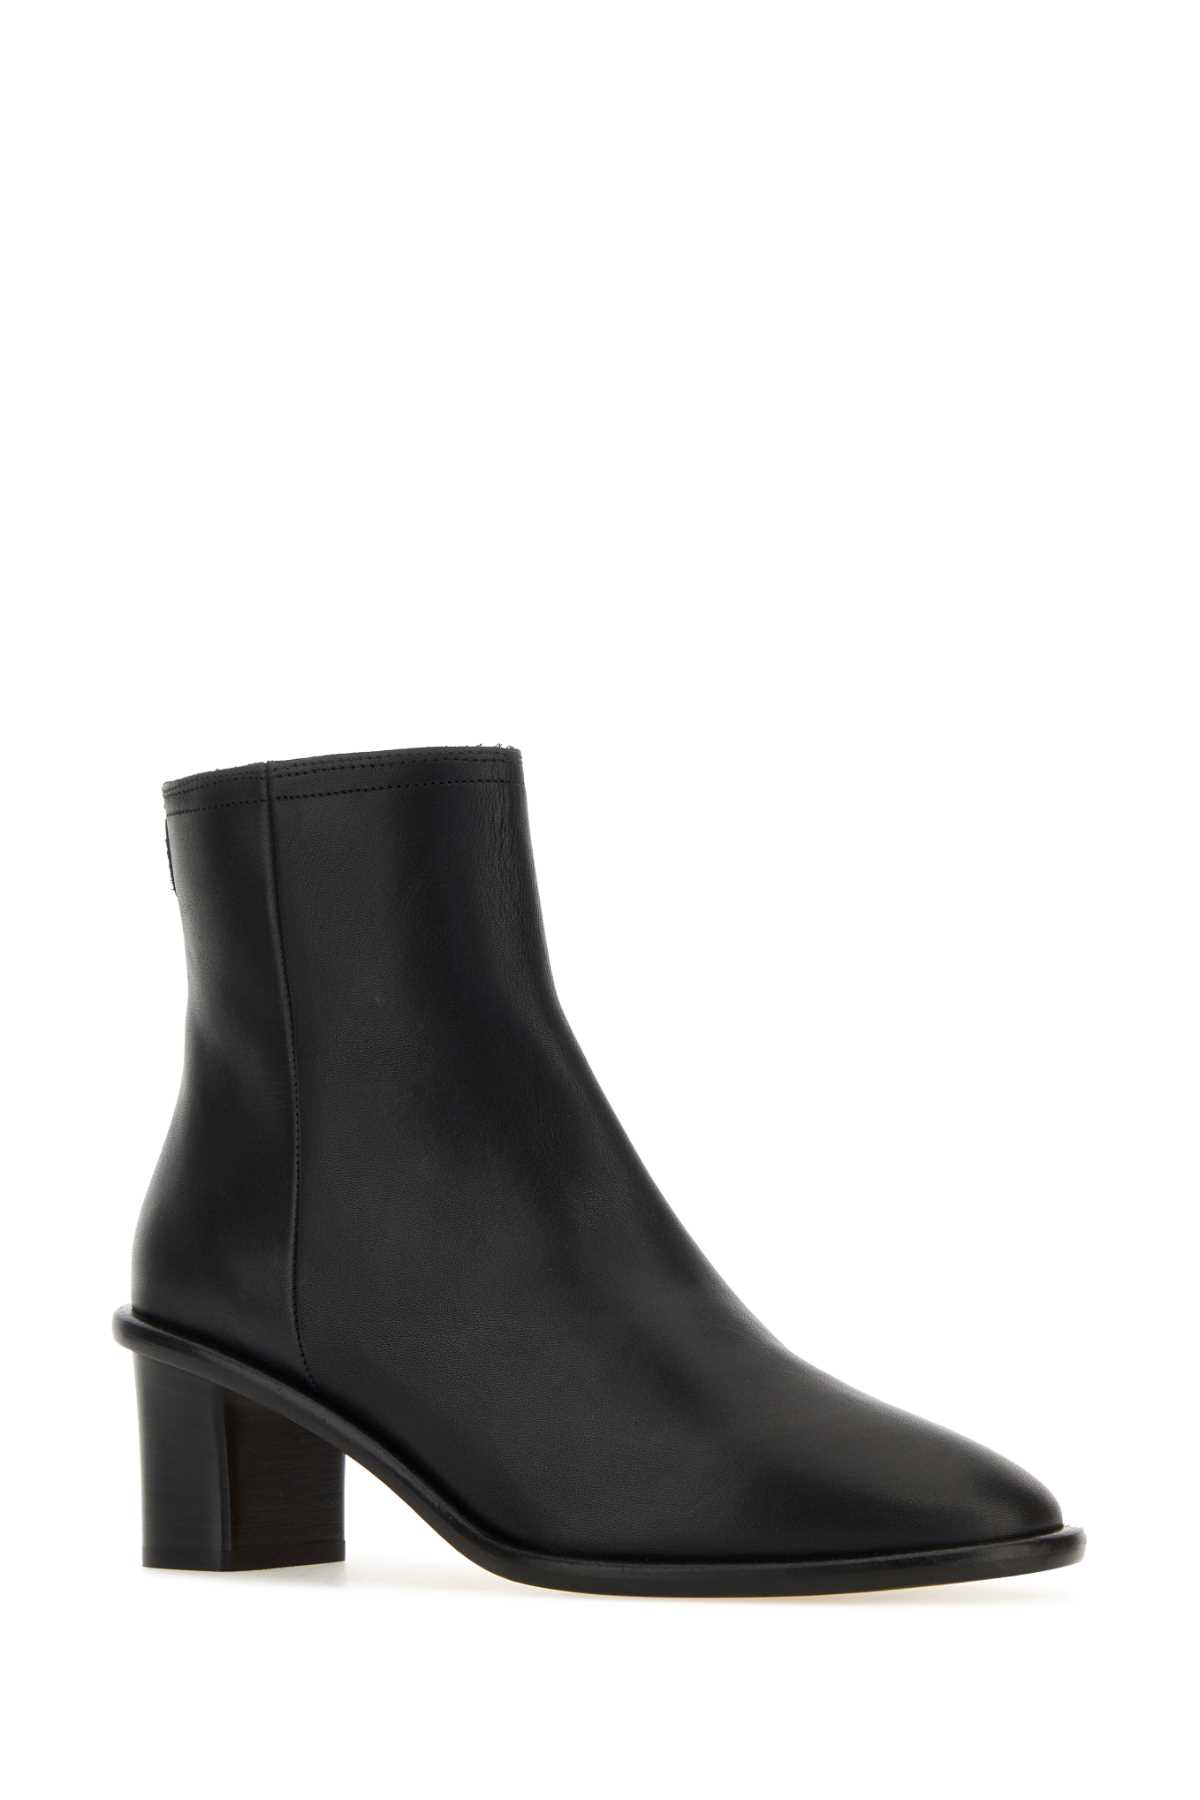 Isabel Marant Black Leather Ankle Boots